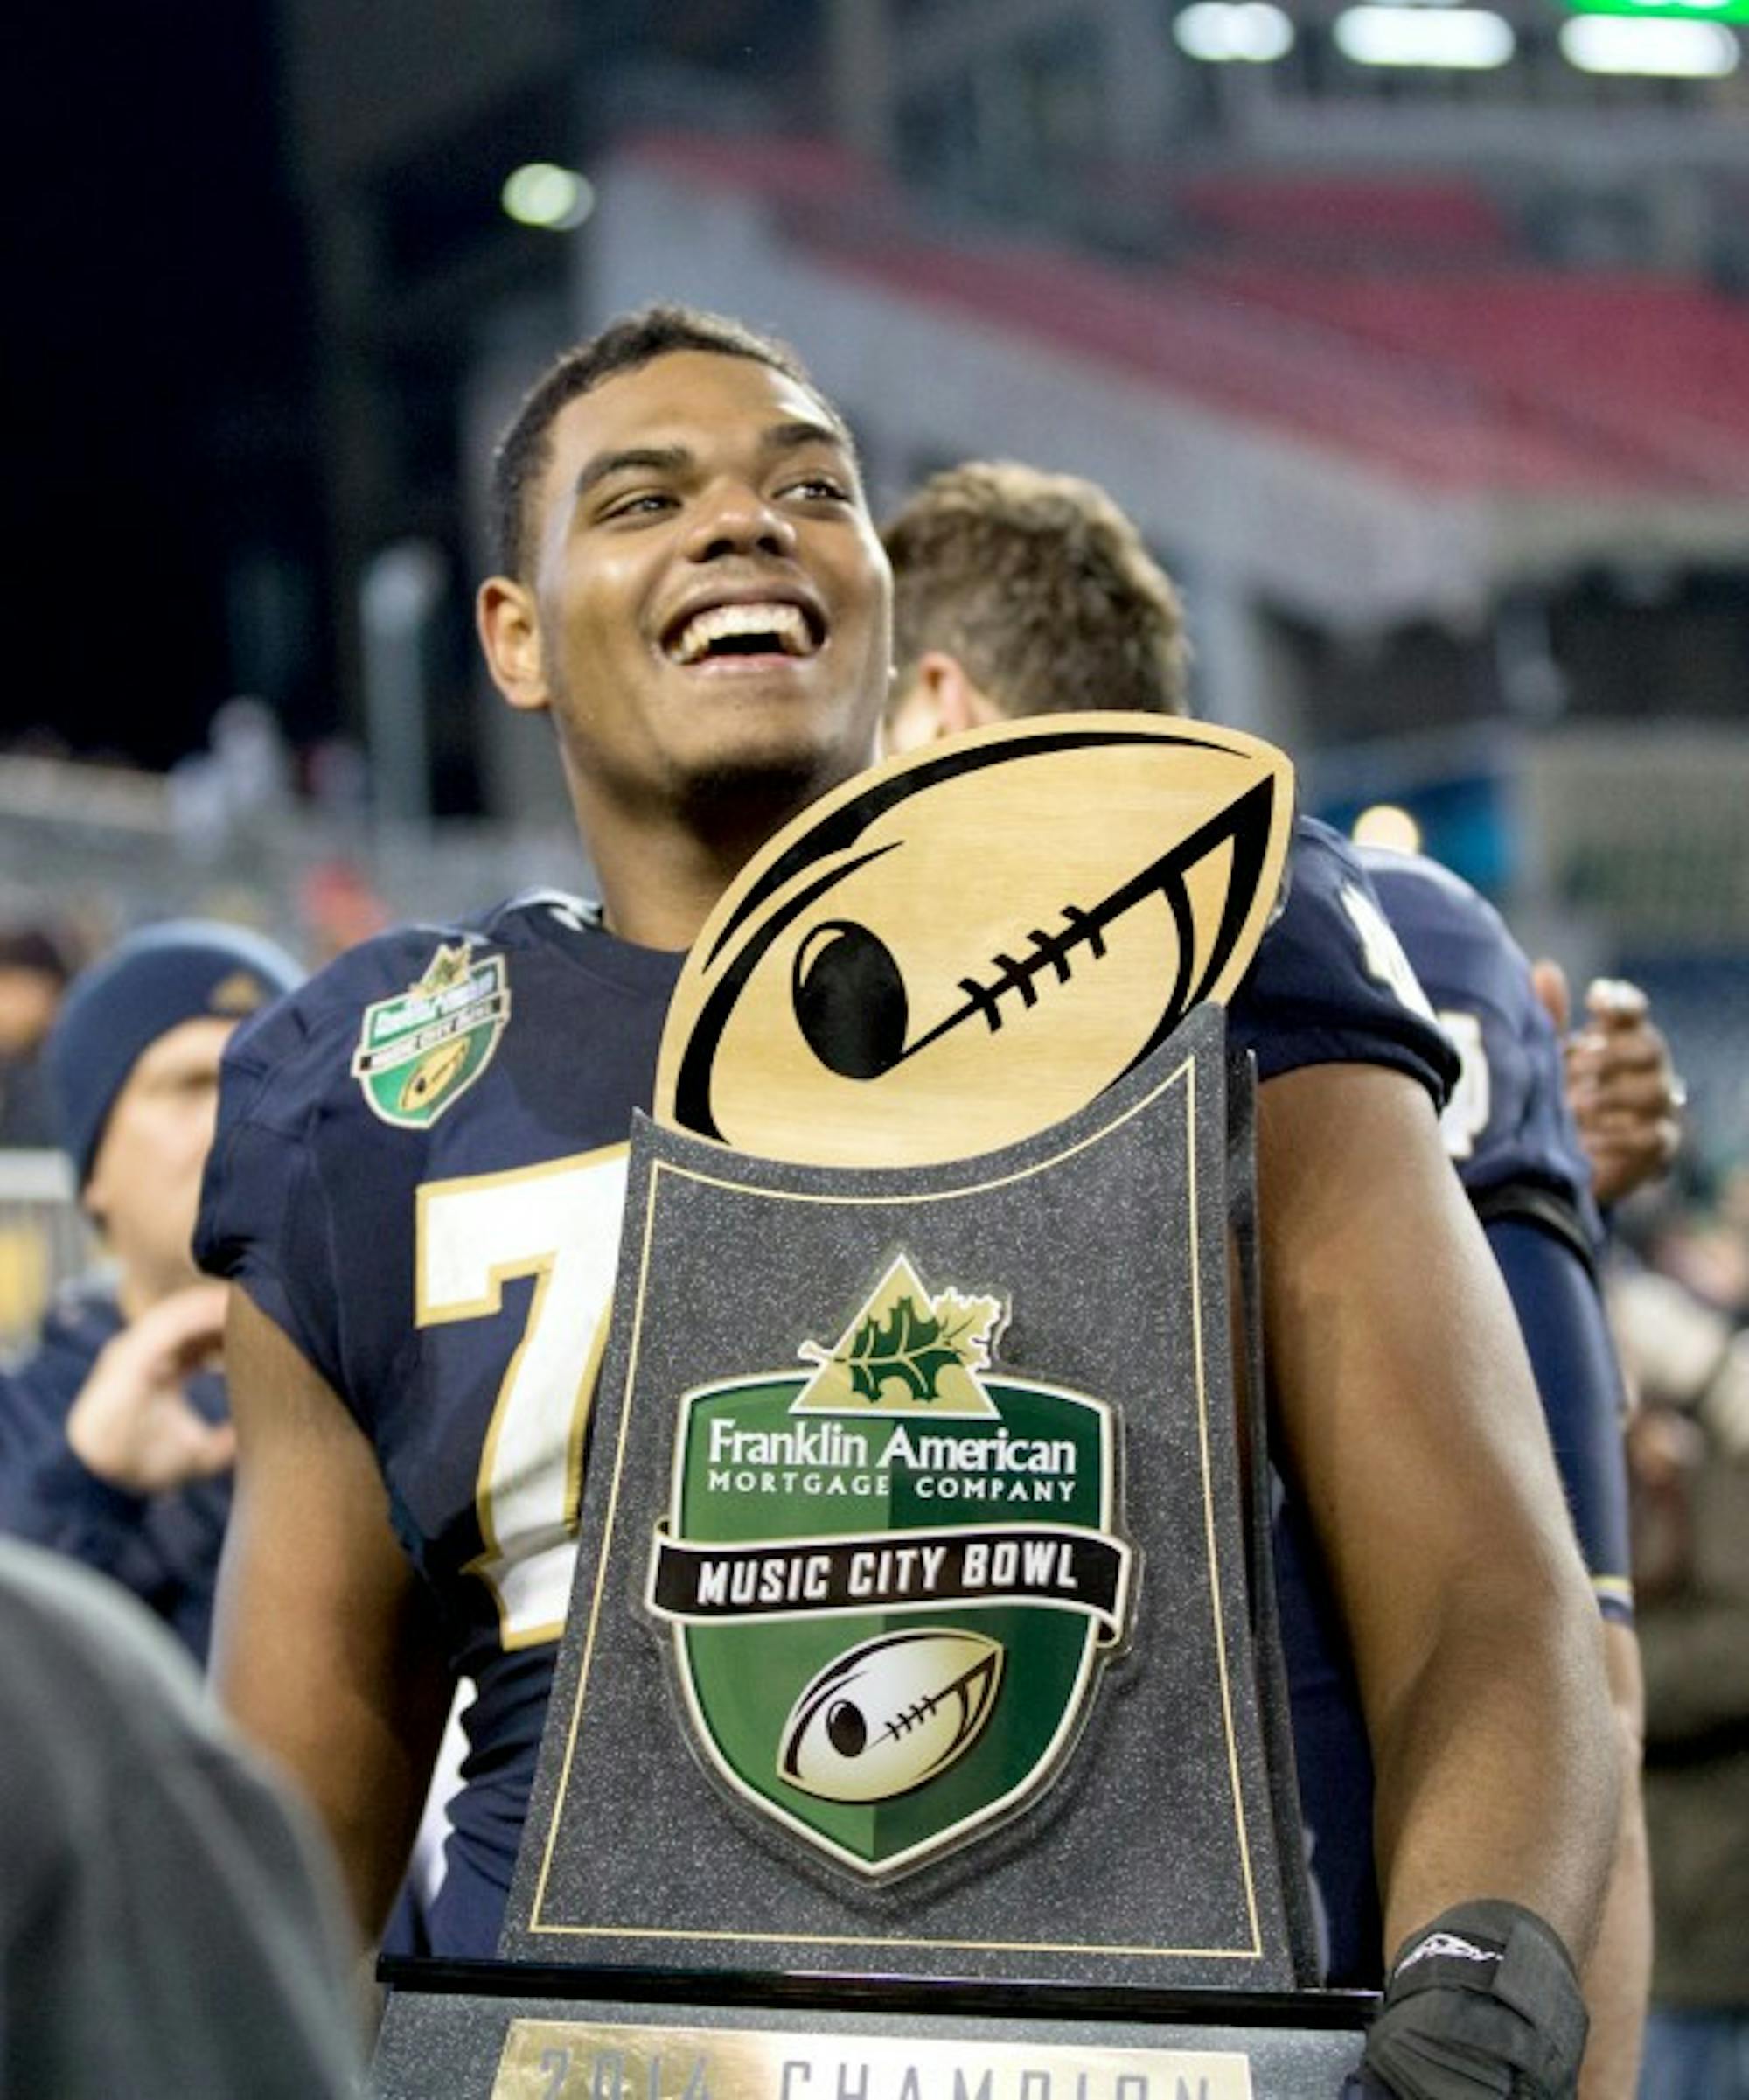 Irish junior offensive lineman Ronnie Stanley celebrates with the Music City Bowl trophy after Notre Dame’s 31-28 win over LSU.